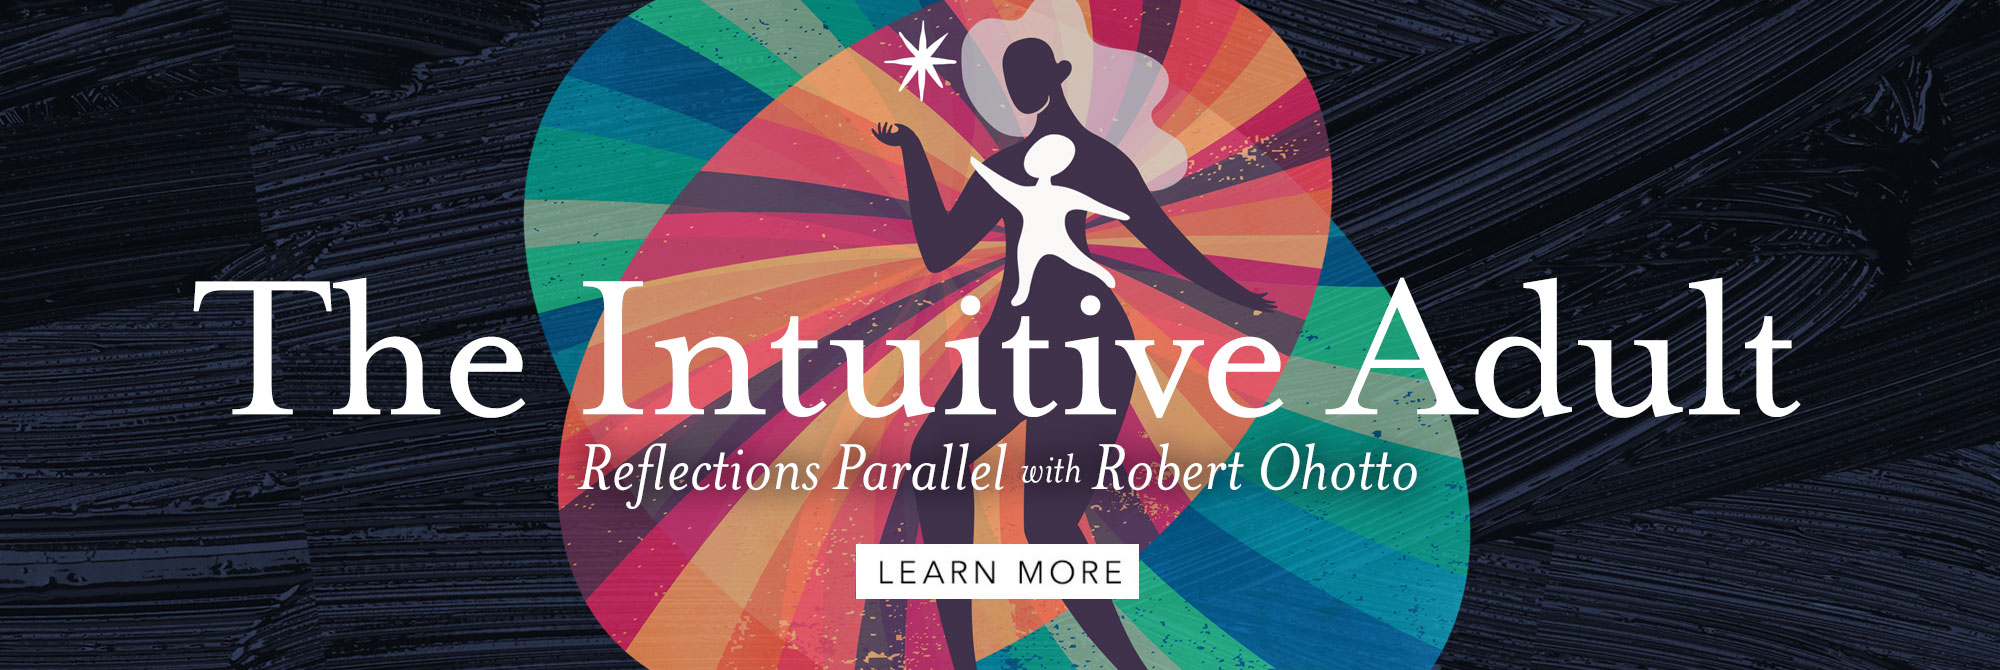 The Intuitive Adult - Reflections Parallel with Robert Ohotto